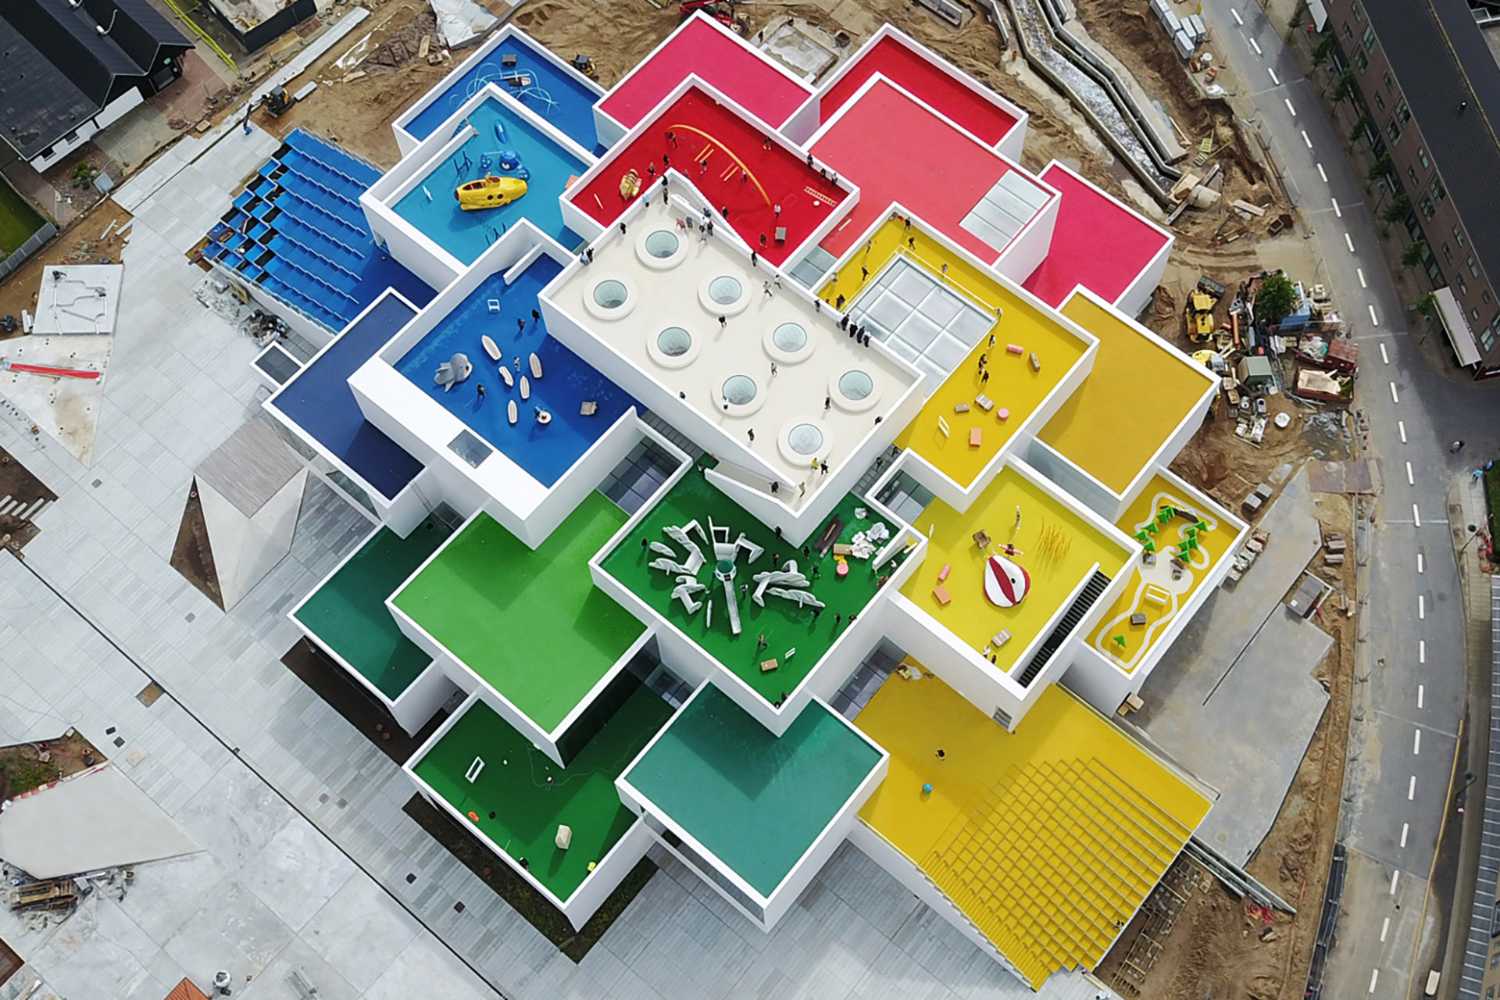 LEGO House in Denmark- where creativity meets architecture